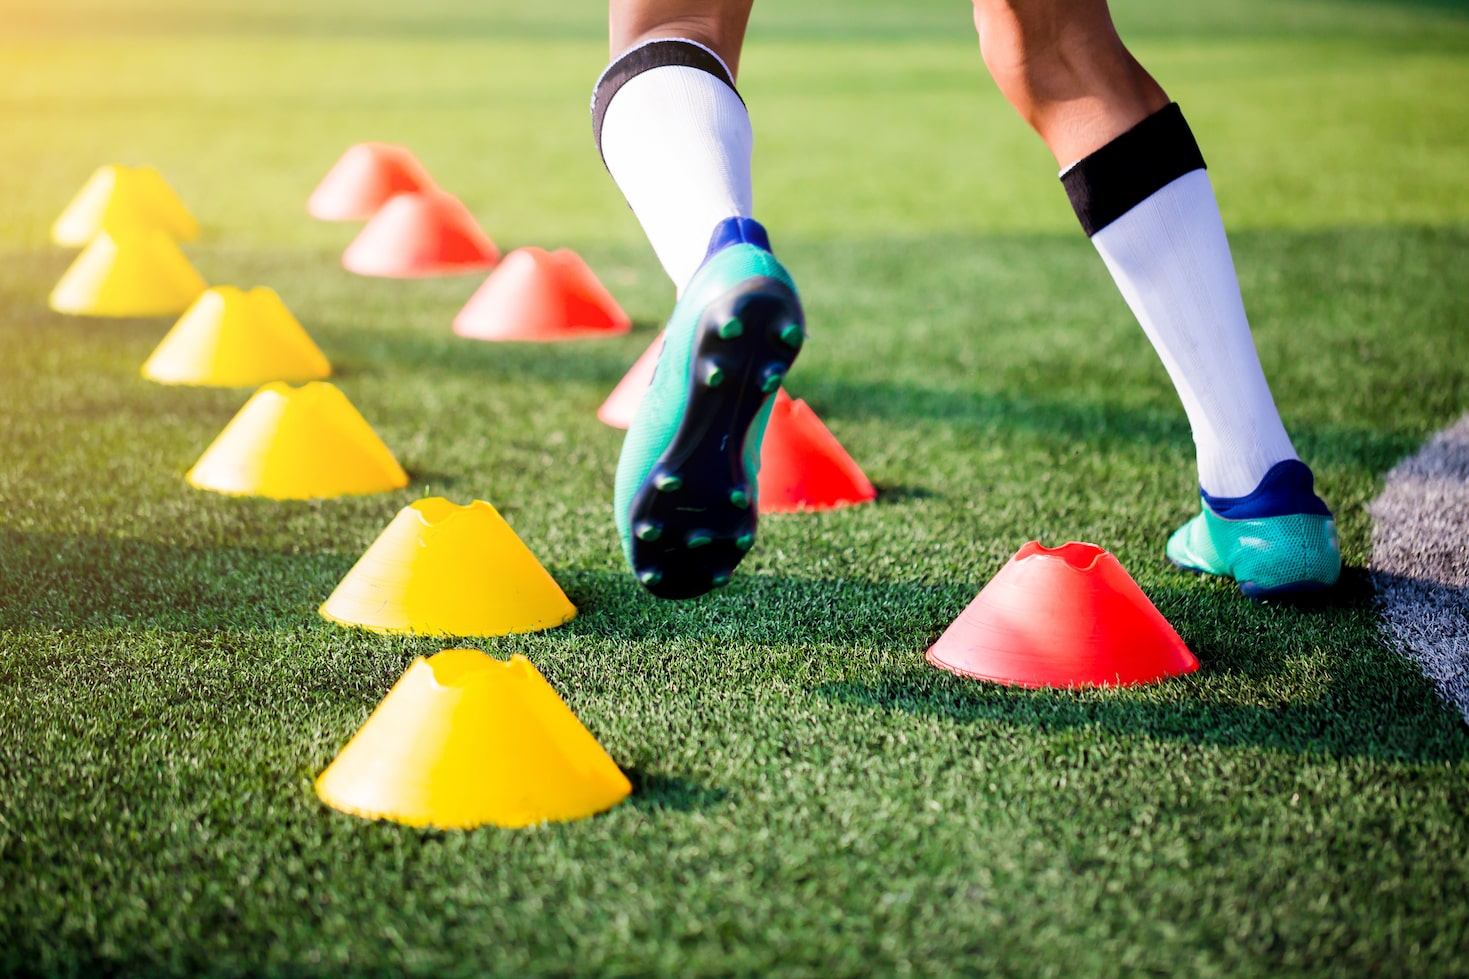 cones for agility in soccer